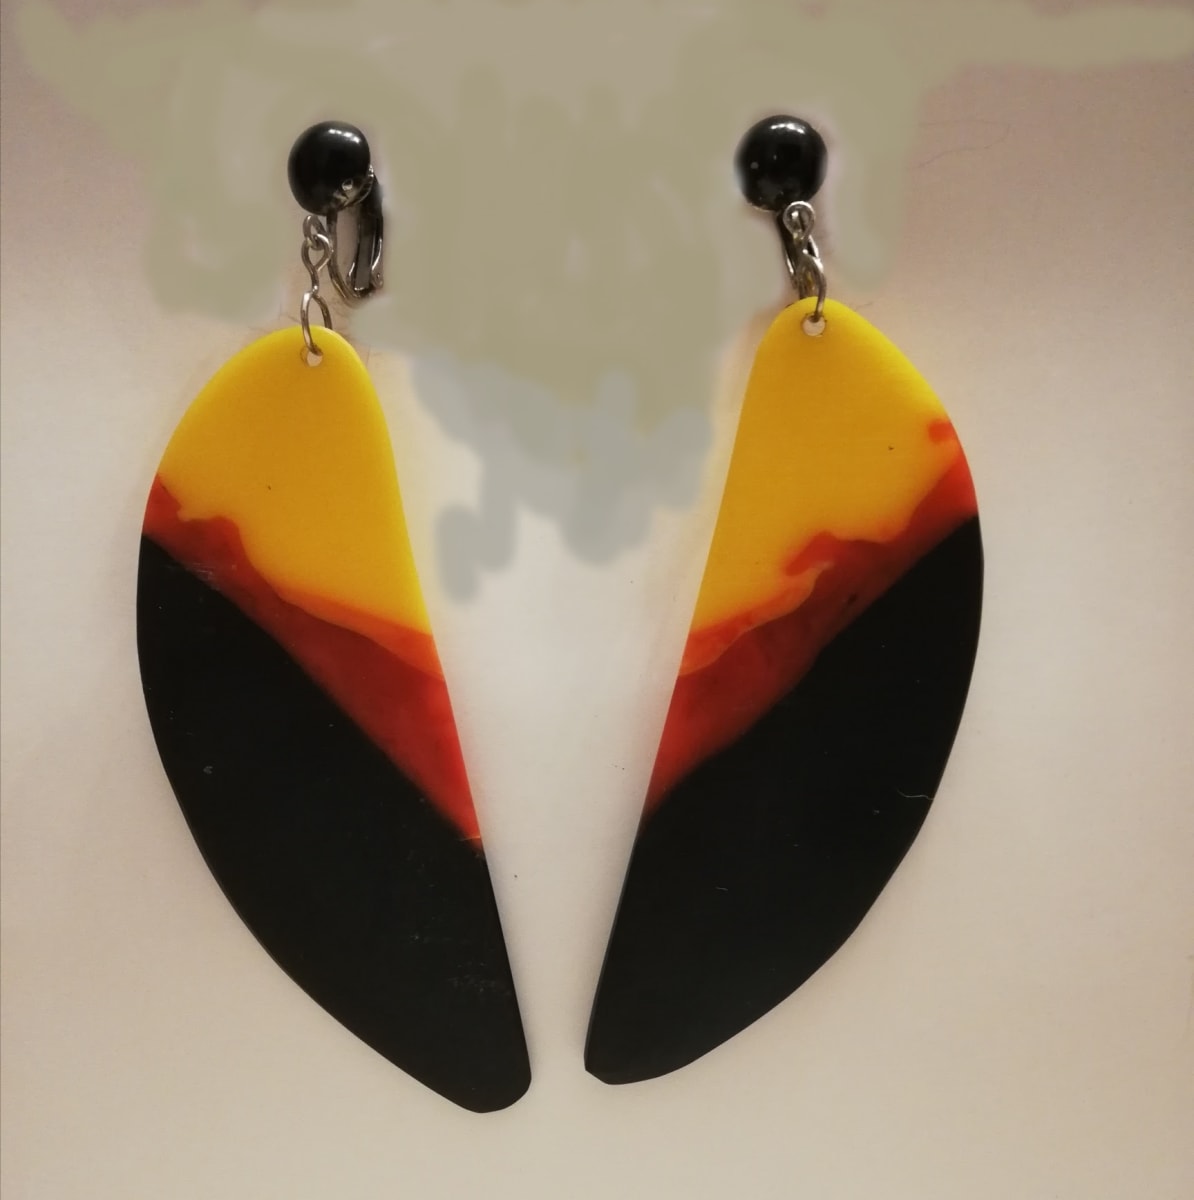 Black, yellow and red 'slice' earrings stainless steel clips  Image: Black, yellow and red 'slice' earrings stainless steel clips